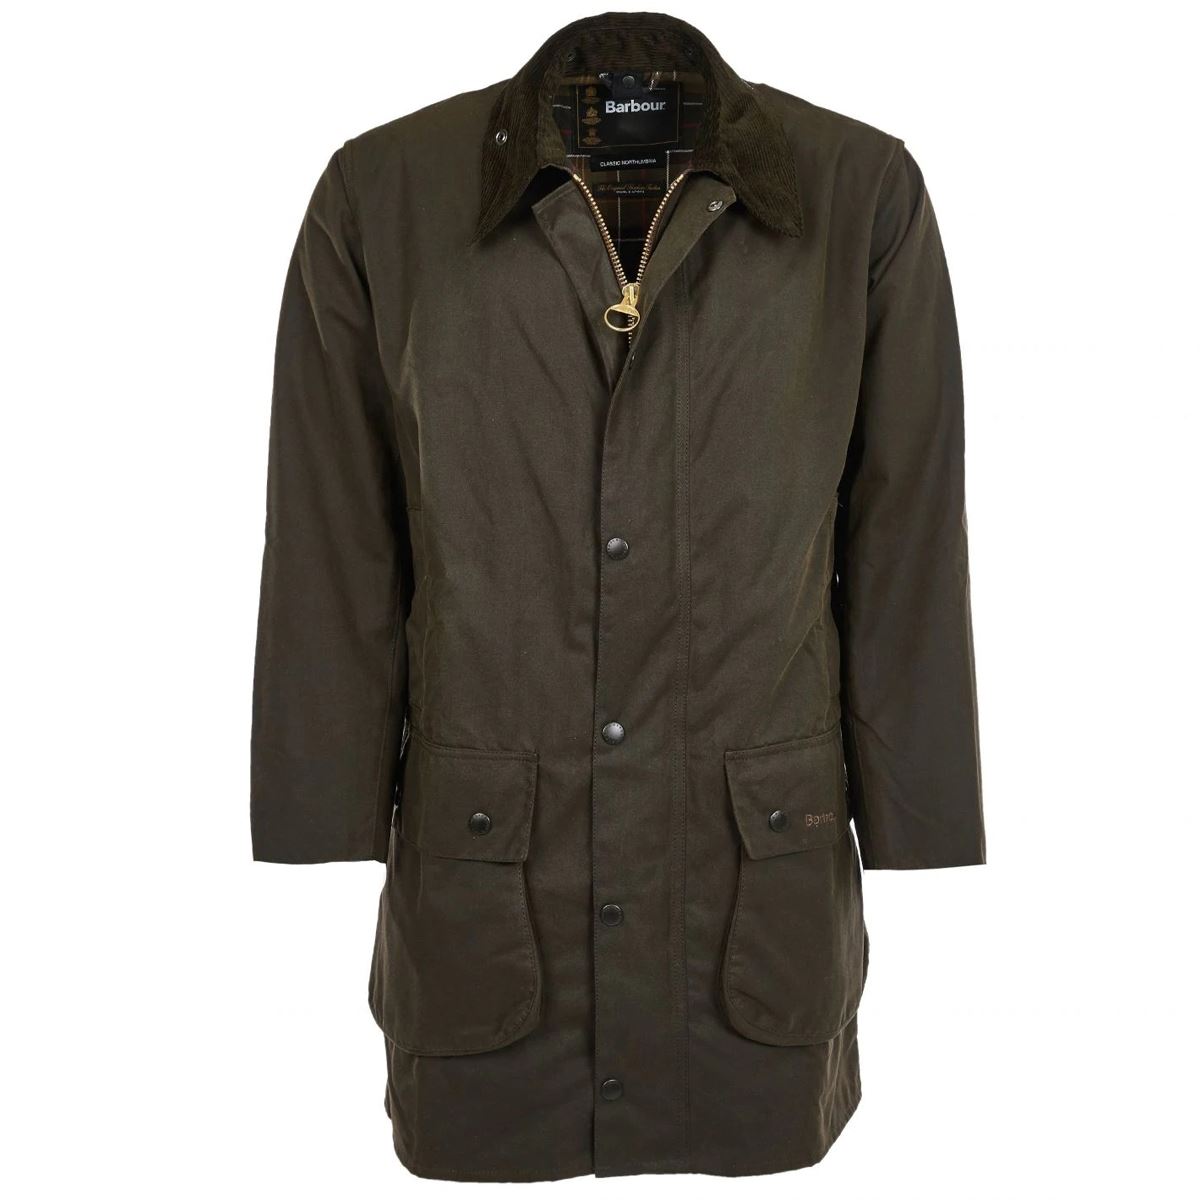 What other choices does the Barbour Northumbria Wax Jacket offer?